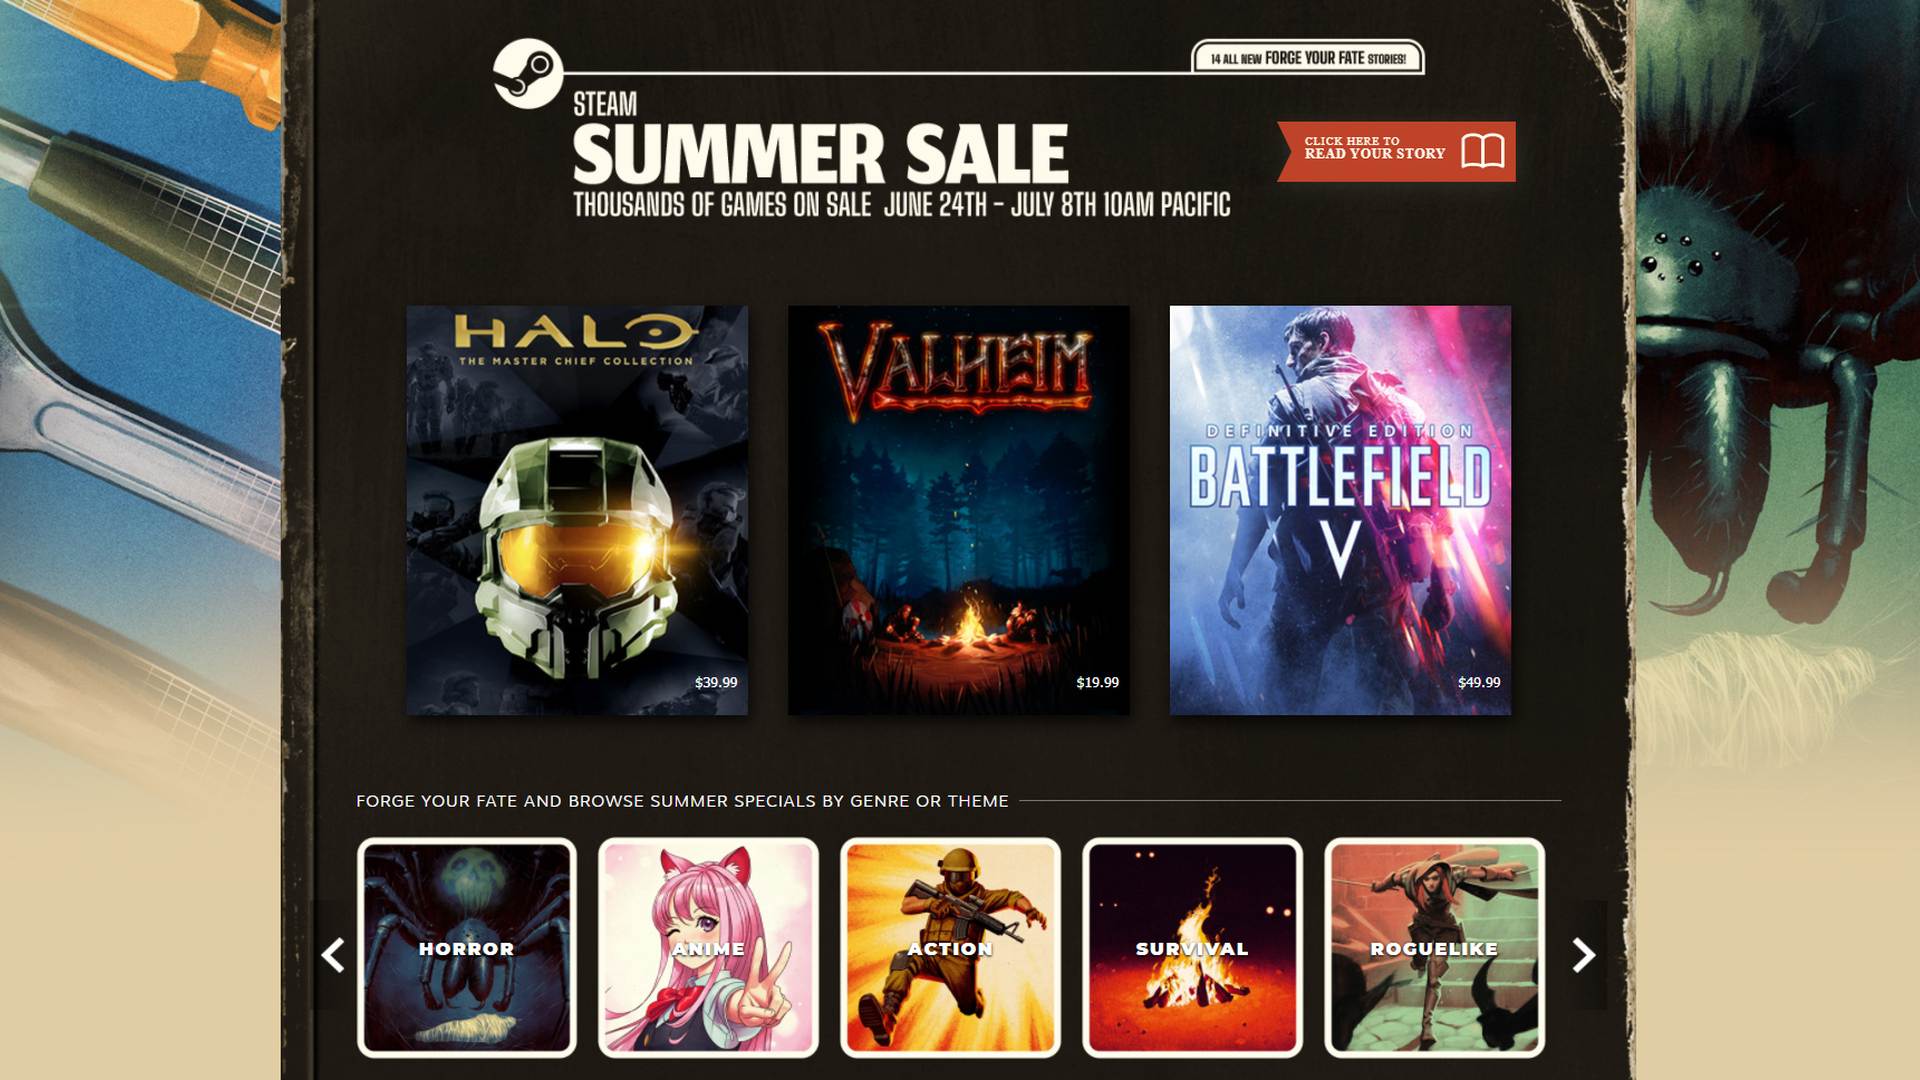 Steam Winter Sale 2021 – What is new?